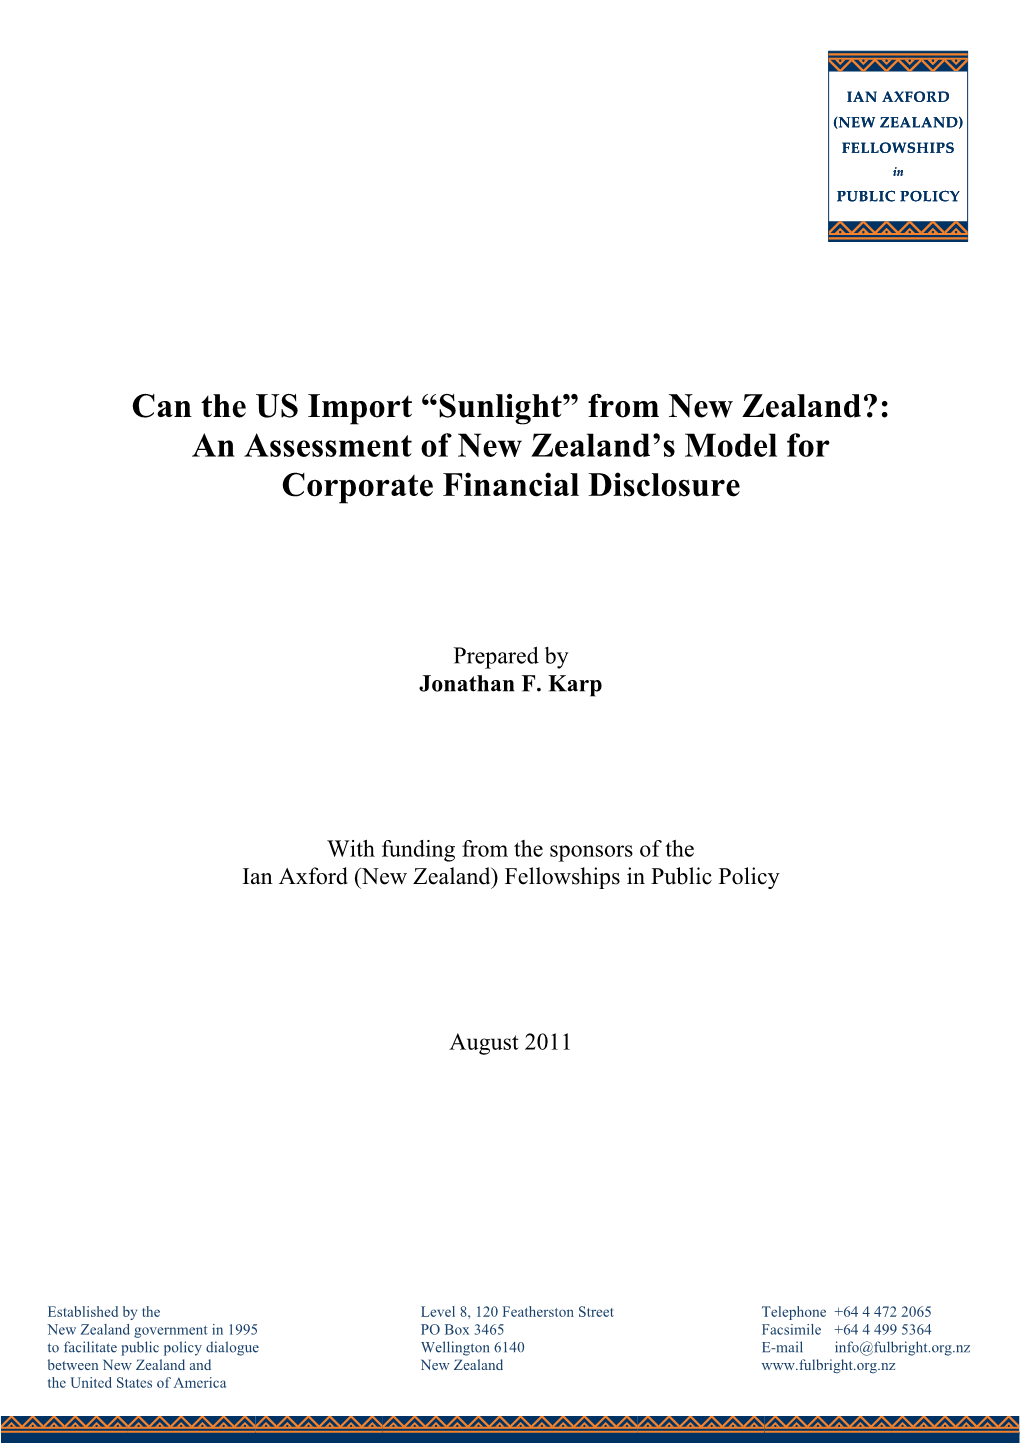 From New Zealand?: an Assessment of New Zealand’S Model for Corporate Financial Disclosure